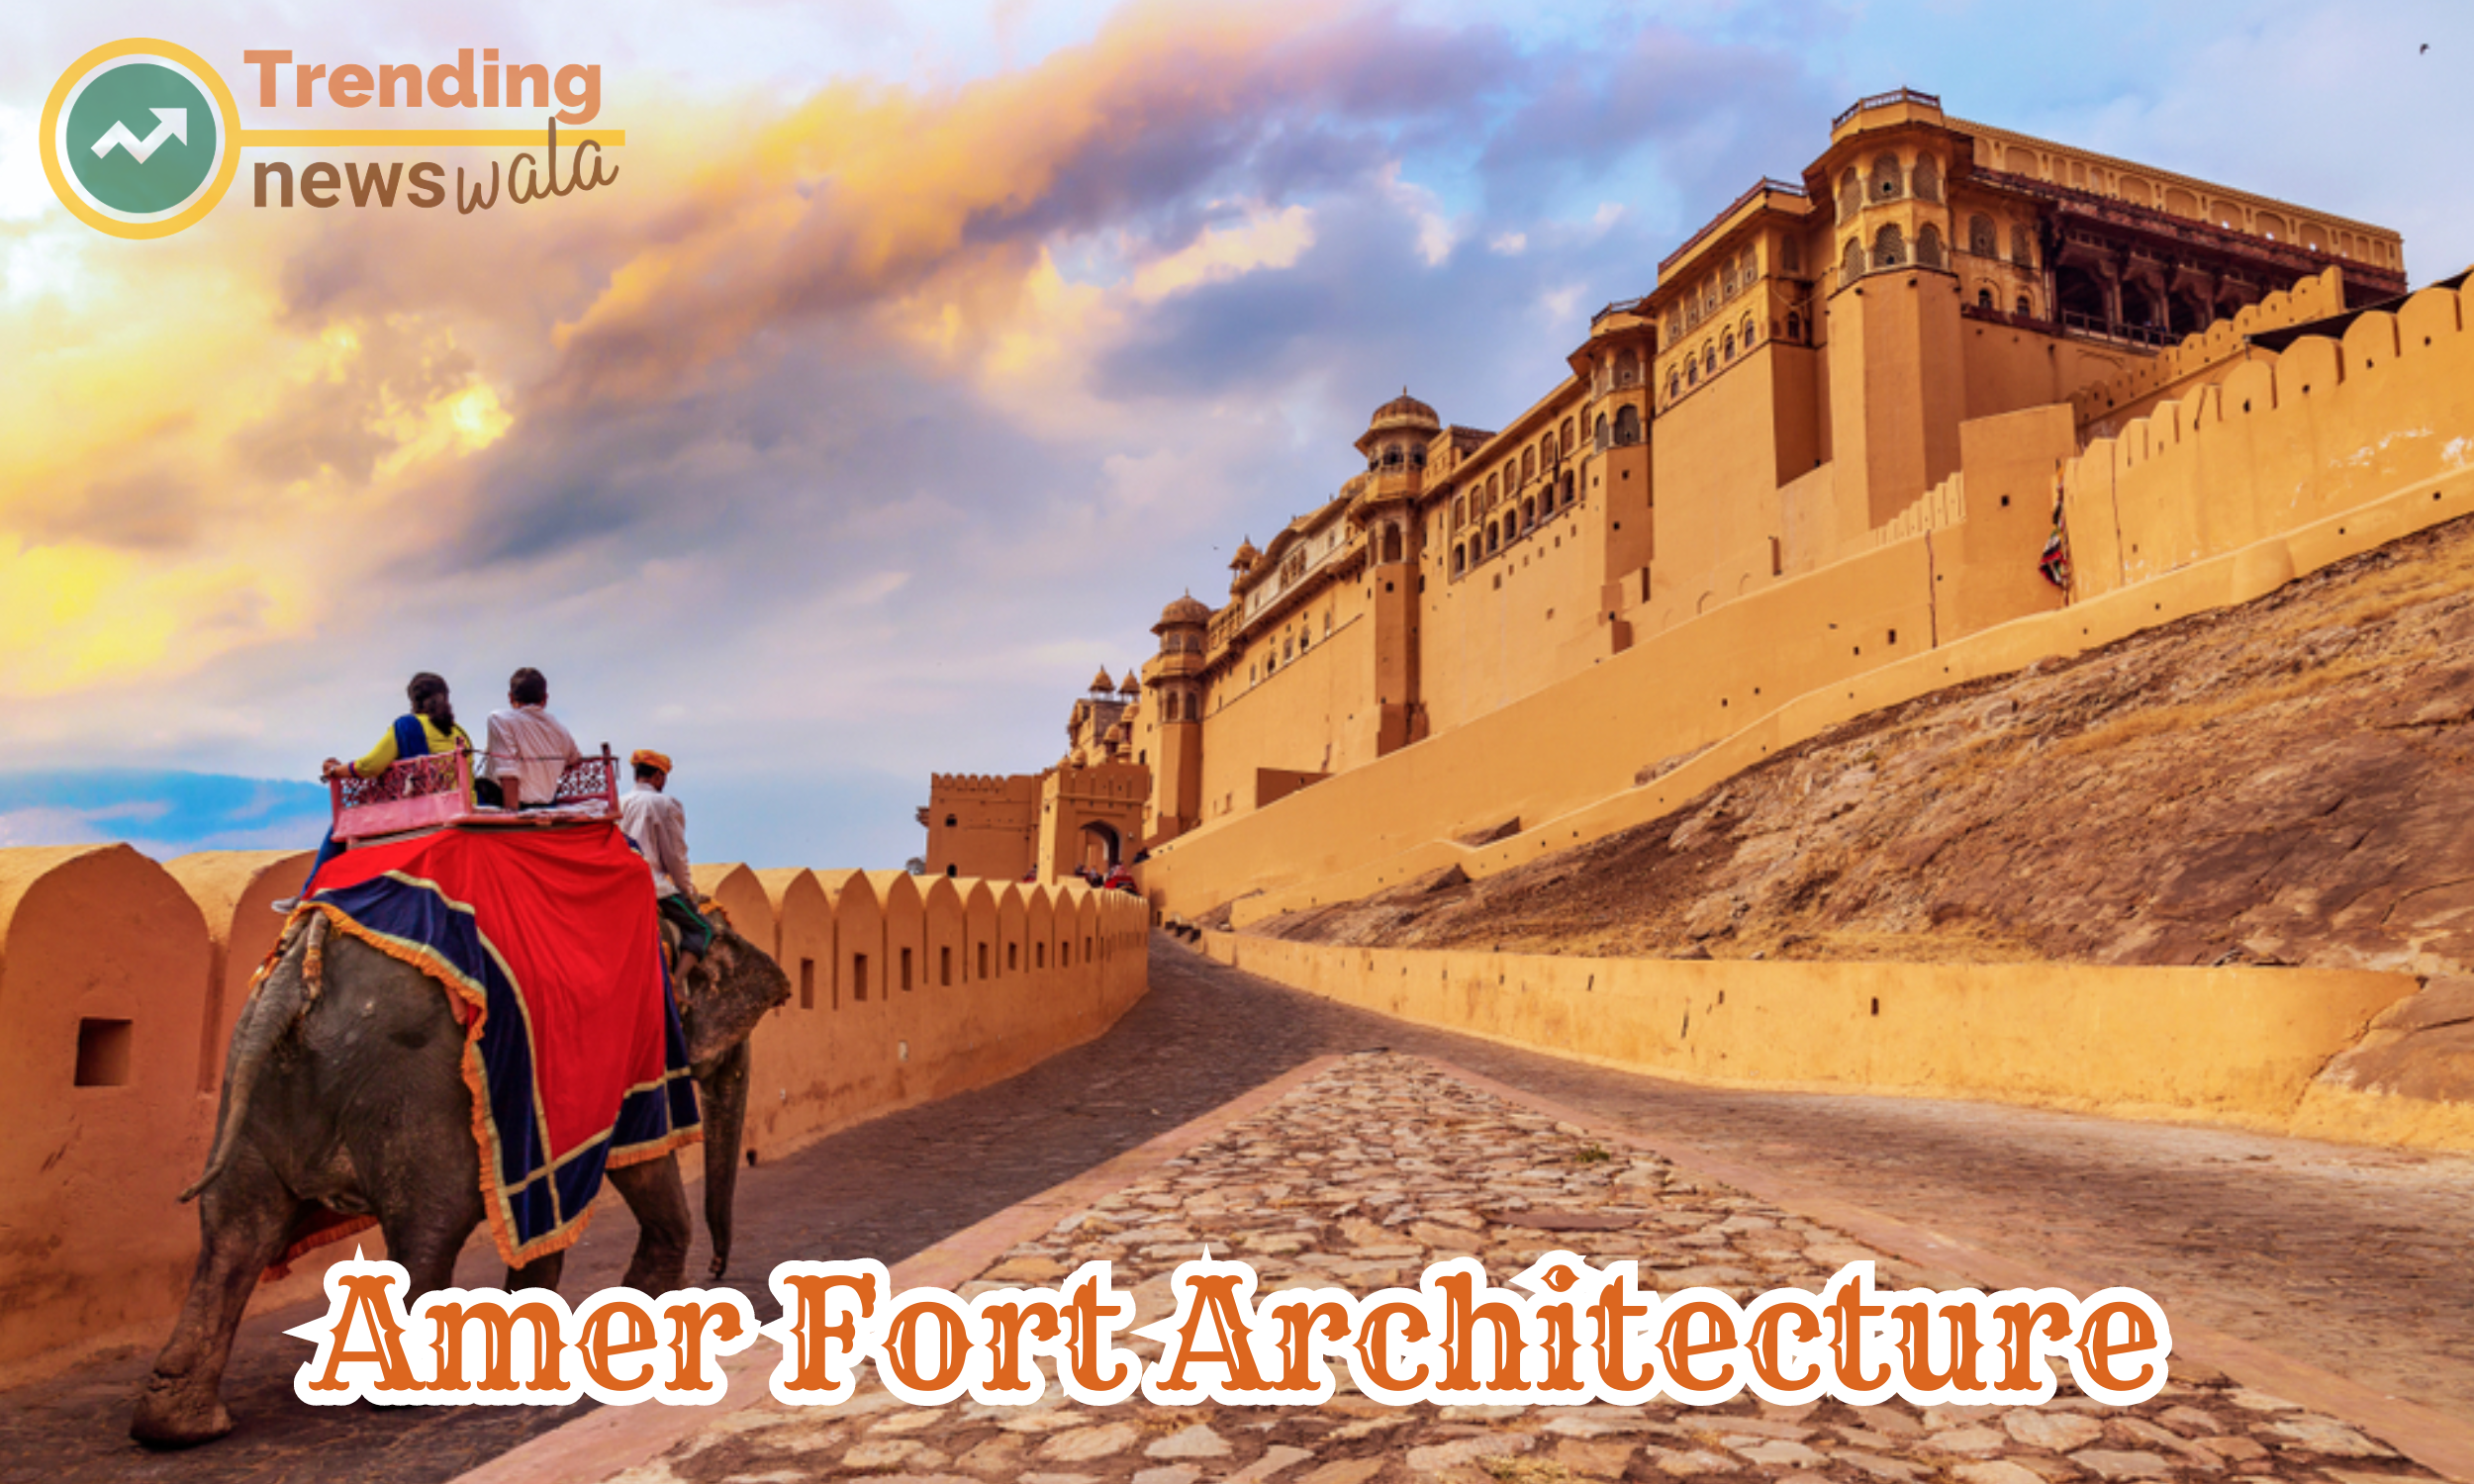 Amer Fort, also known as Amber Fort, is a majestic fortress located on a hill in Amer